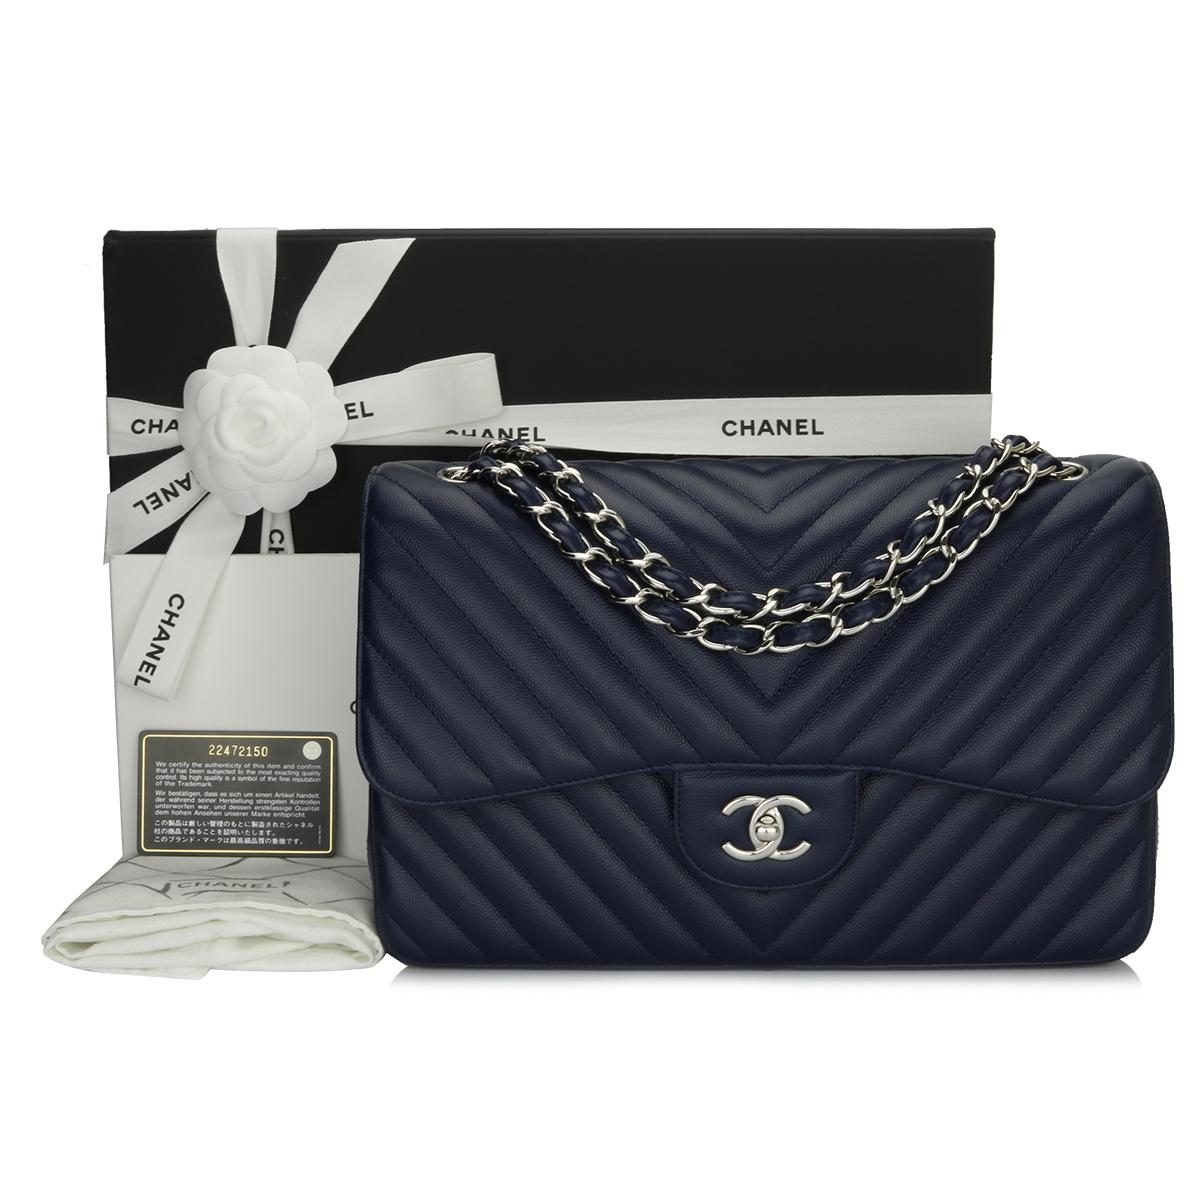 Authentic CHANEL Classic Double Flap Jumbo Bag Chevron Navy Caviar with Silver Hardware 2017.

This stunning bag is in pristine condition, the bag still holds its original shape well, and the hardware is still very shiny. The leather smells fresh as